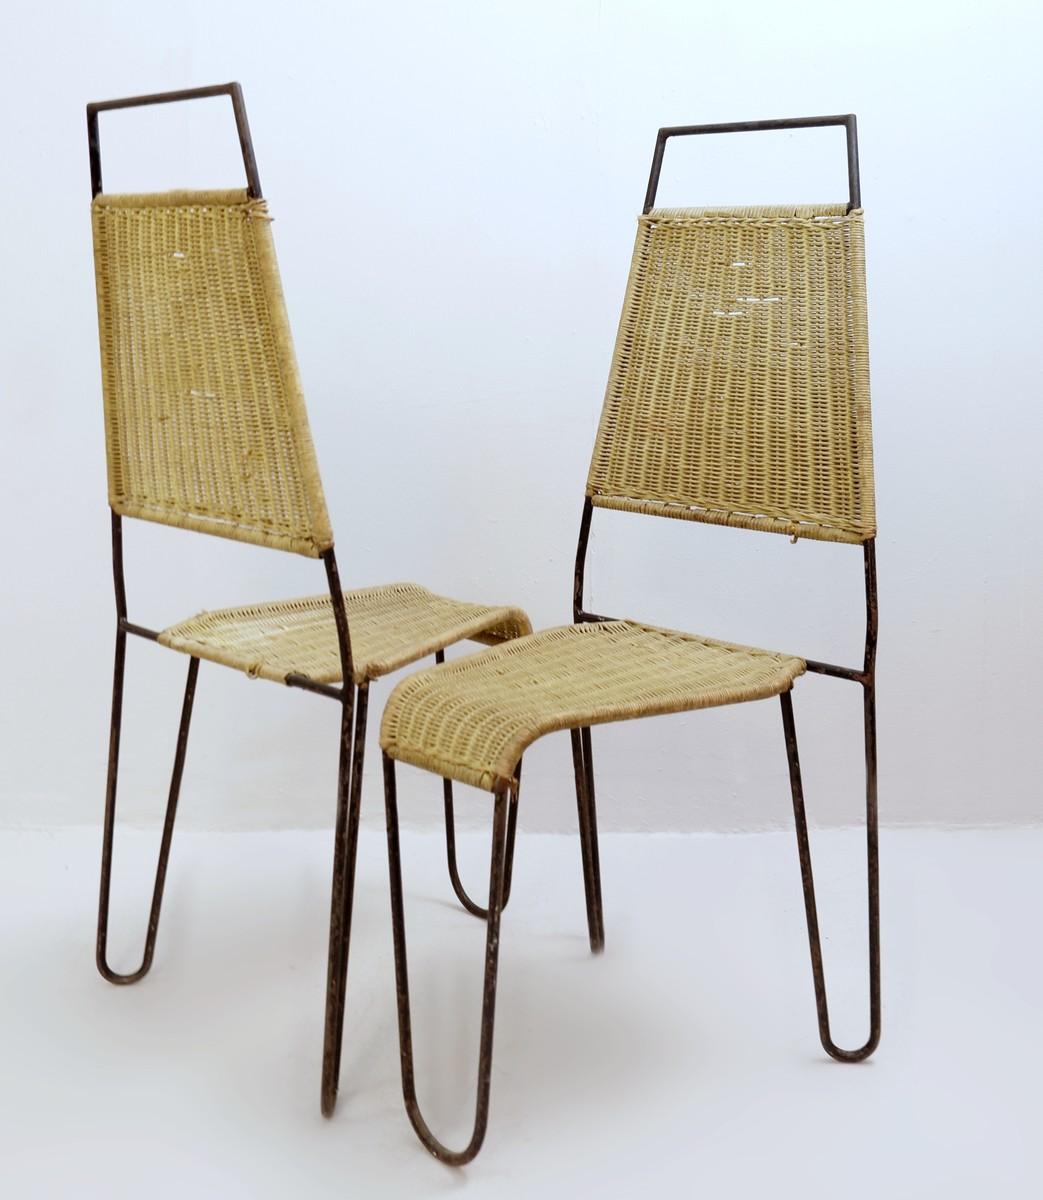 pair of chairs in wicker and steel attr. to Raoul Guys for Airborne , ca 1950.